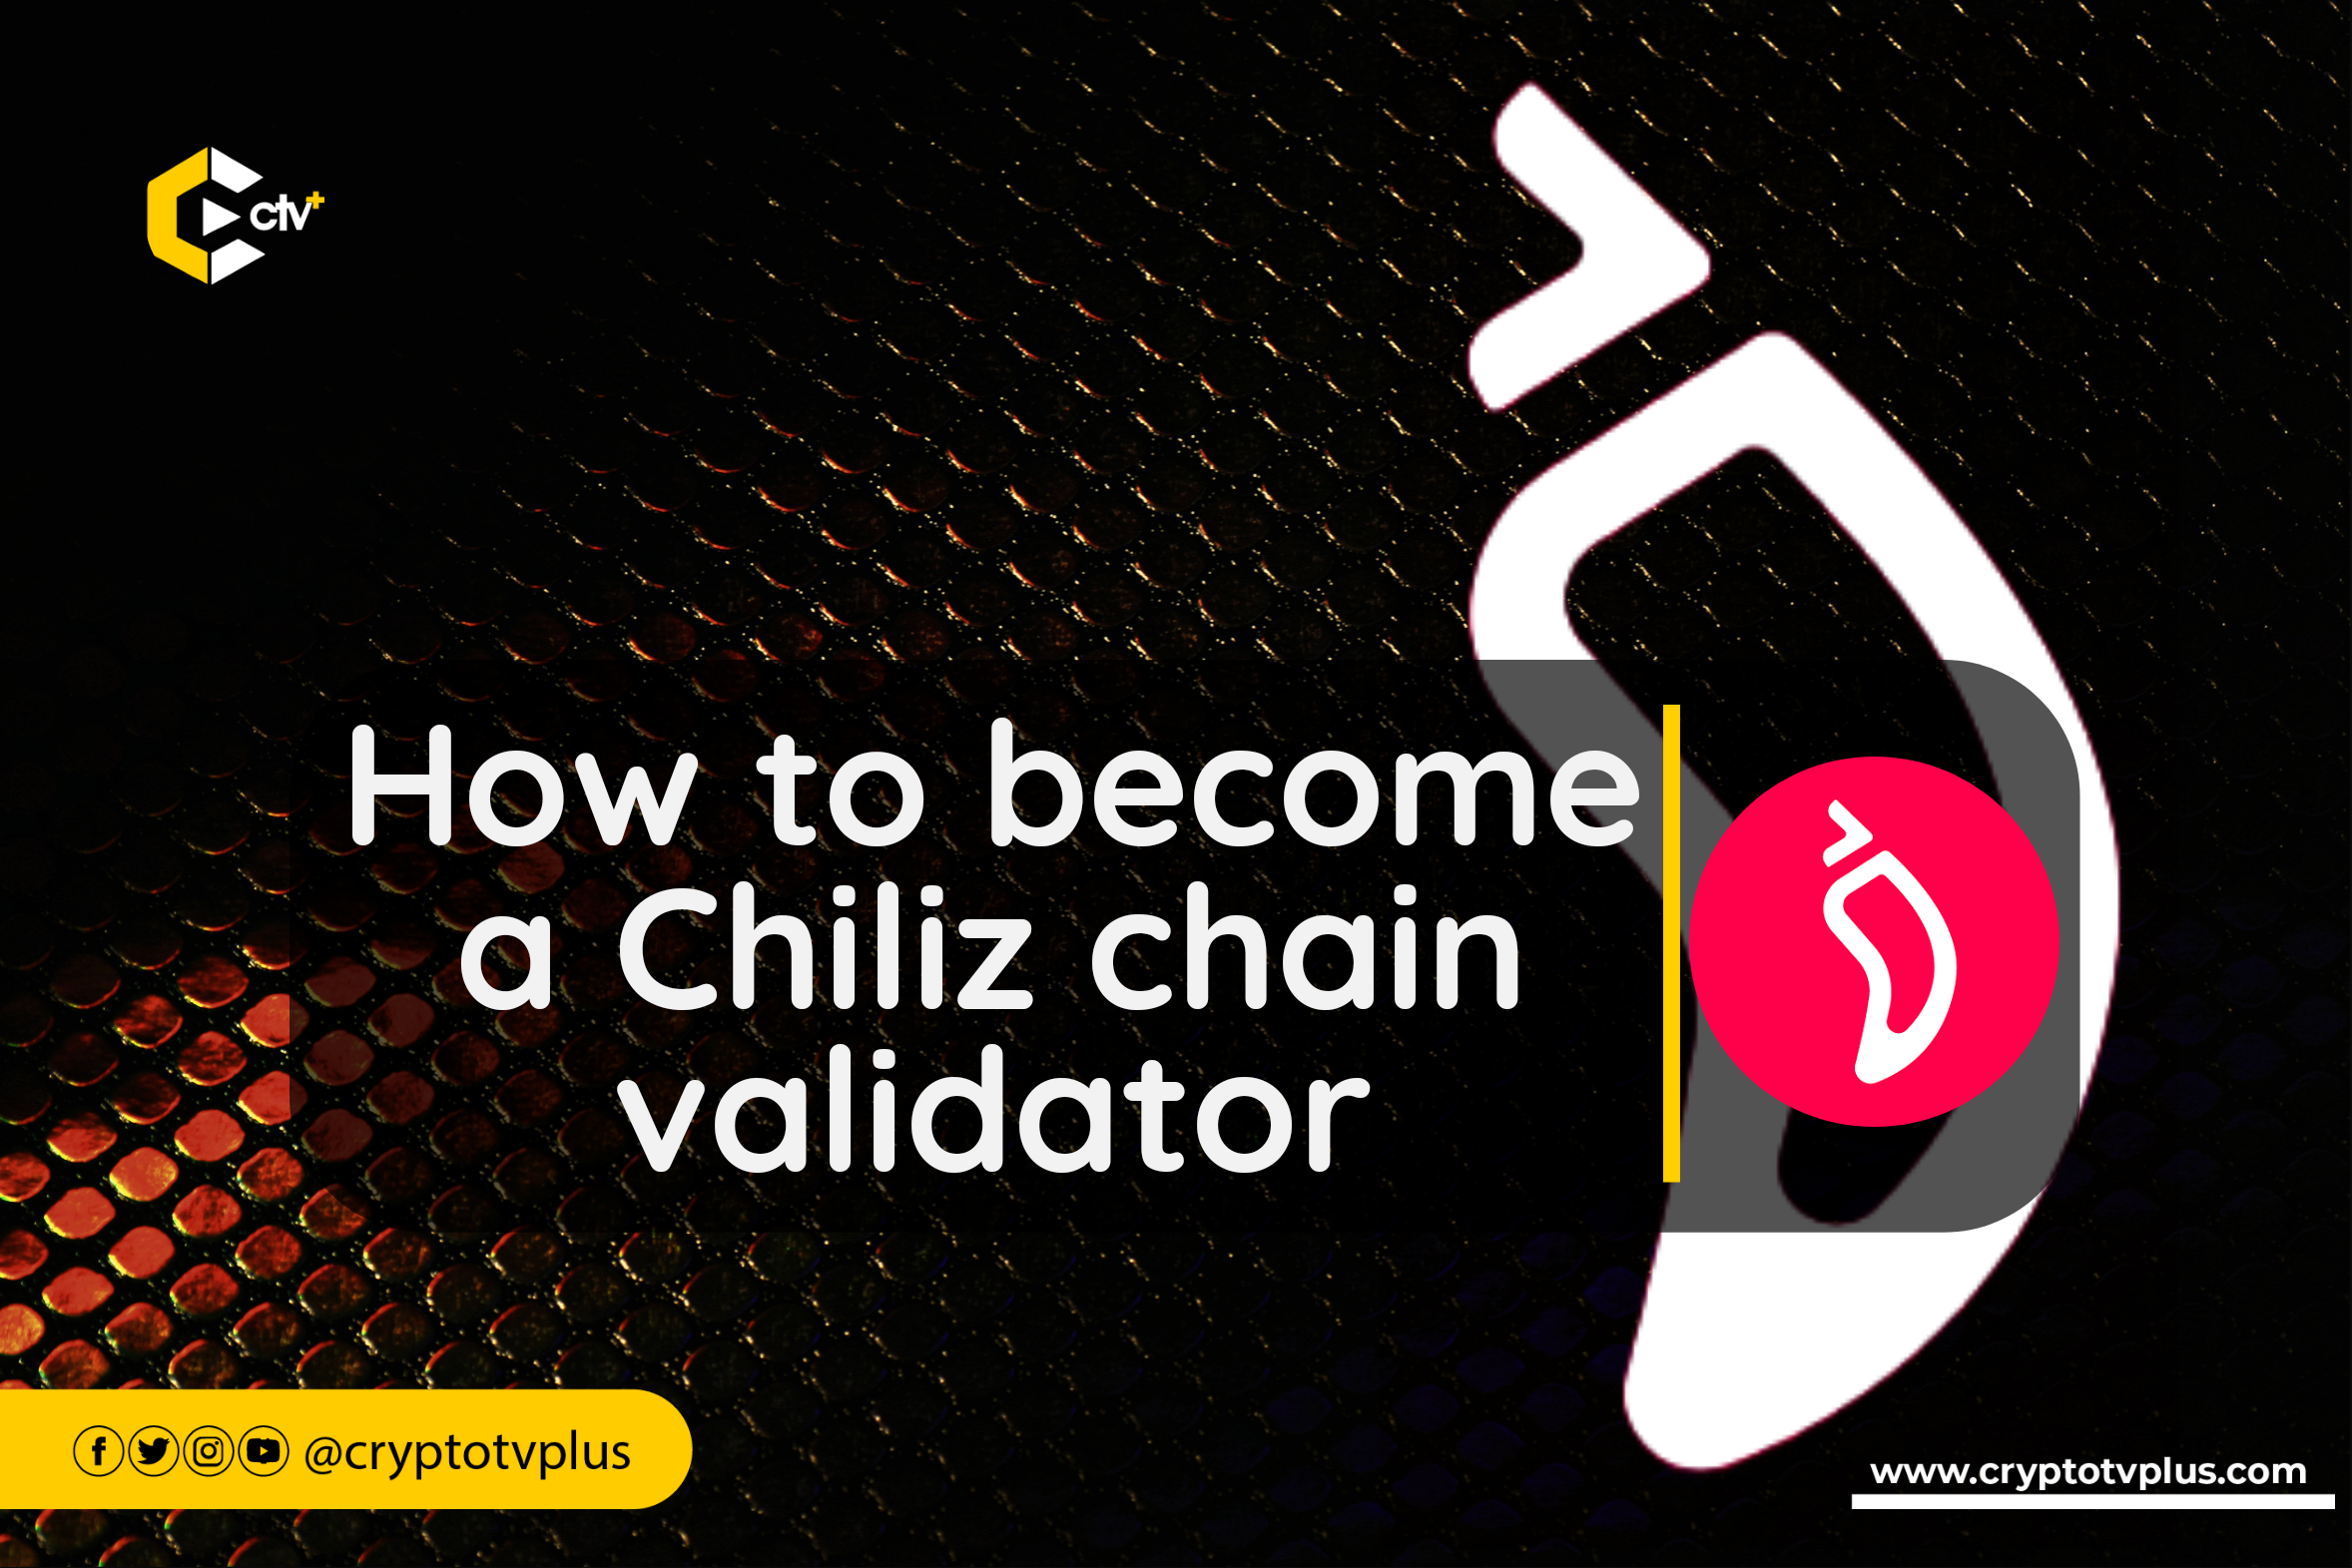 Learn how to become a Chiliz chain validator and contribute to the network's security and decentralization. Join the validator community today!